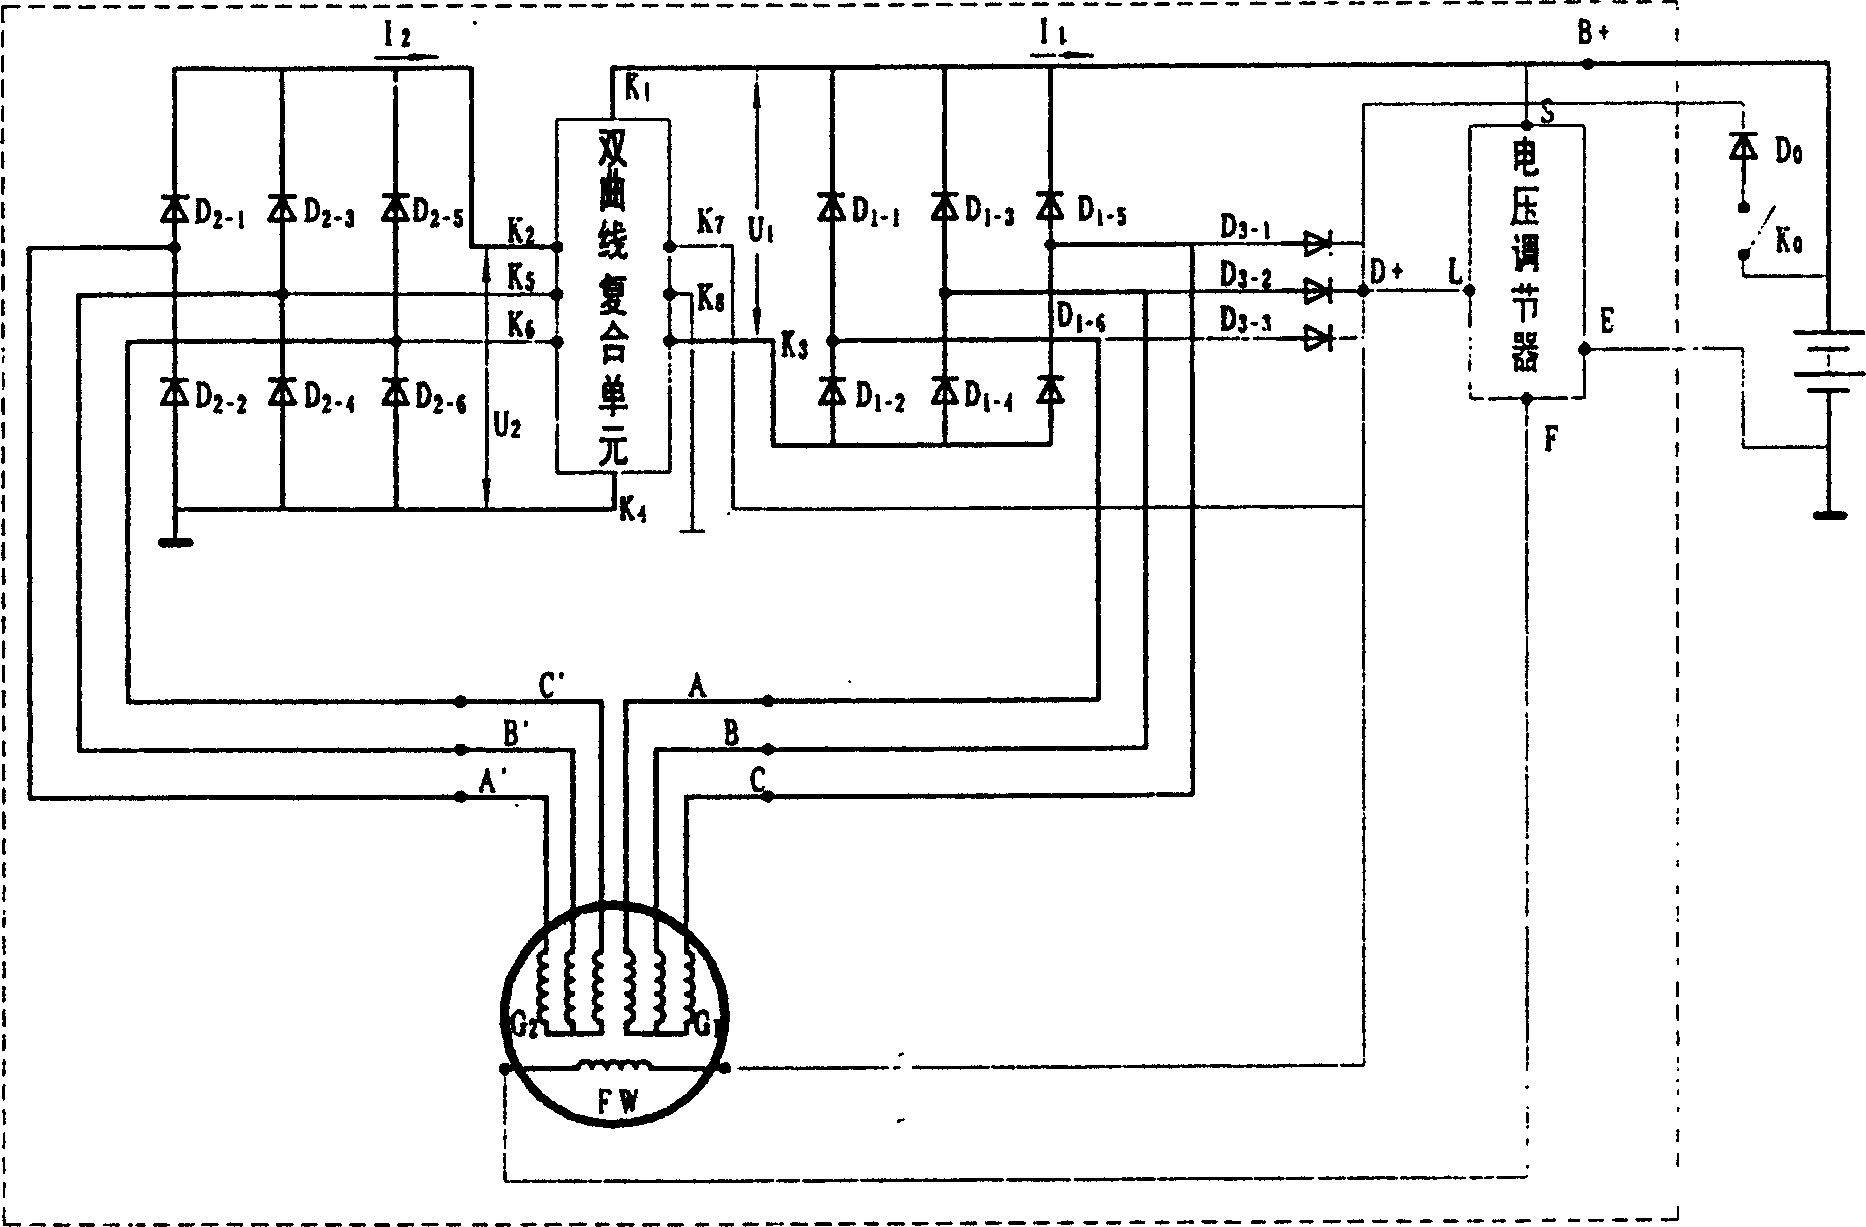 AC generator having two output current - rotating speed curves